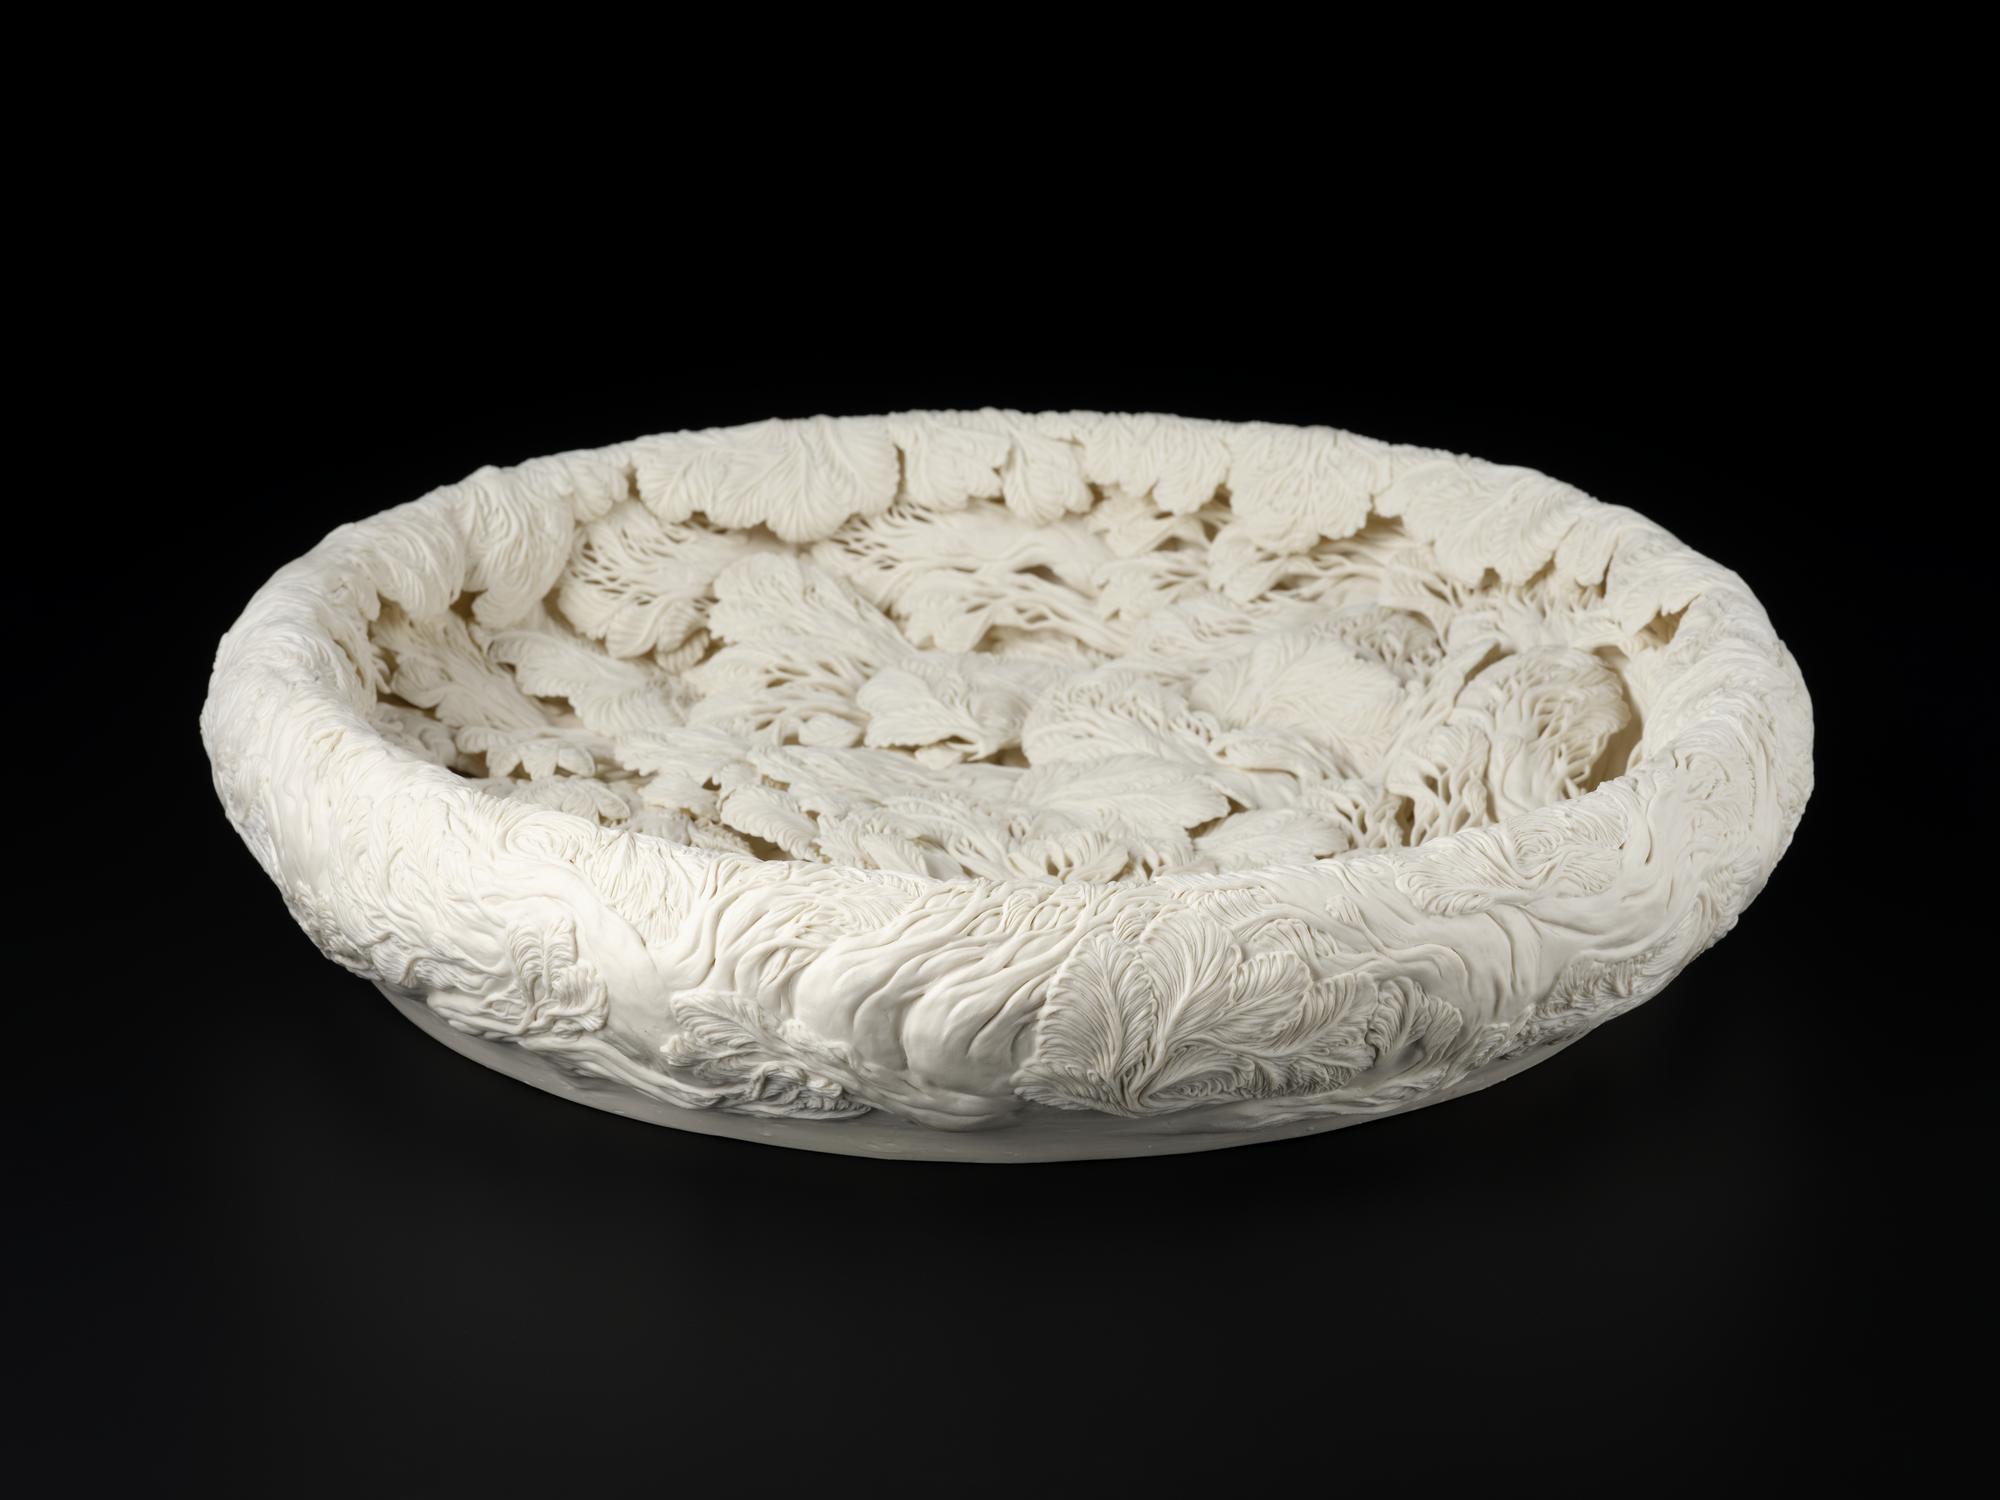 Japanese sculptural bowl of unglazed porcelain entitled 'A Large Pine Tree Pool' by Hitomi Hosono in 2010. It is decorated with sprig moulded pine tree branches flowing in water and enhanced with hand carving and piercing. V.2019.72,